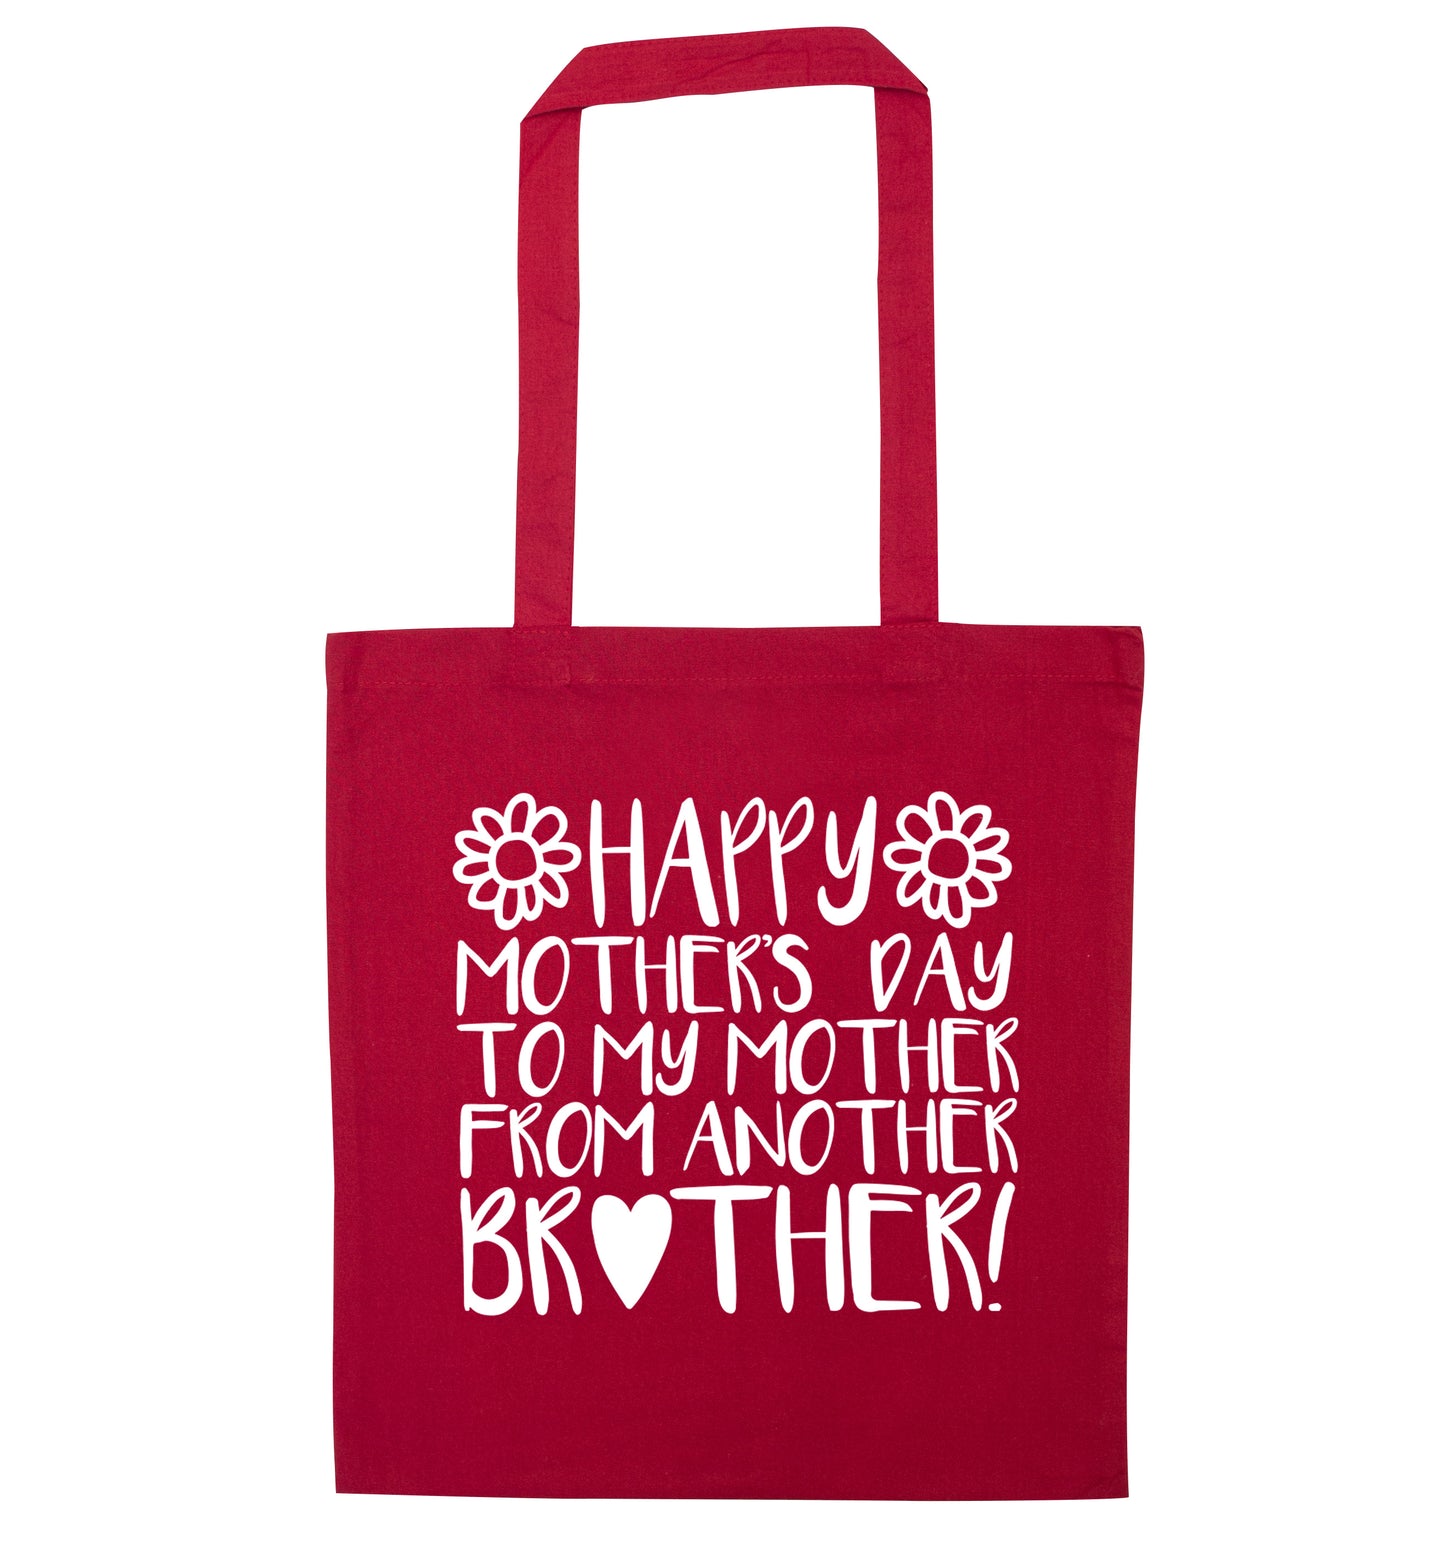 Happy mother's day to my mother from another brother red tote bag